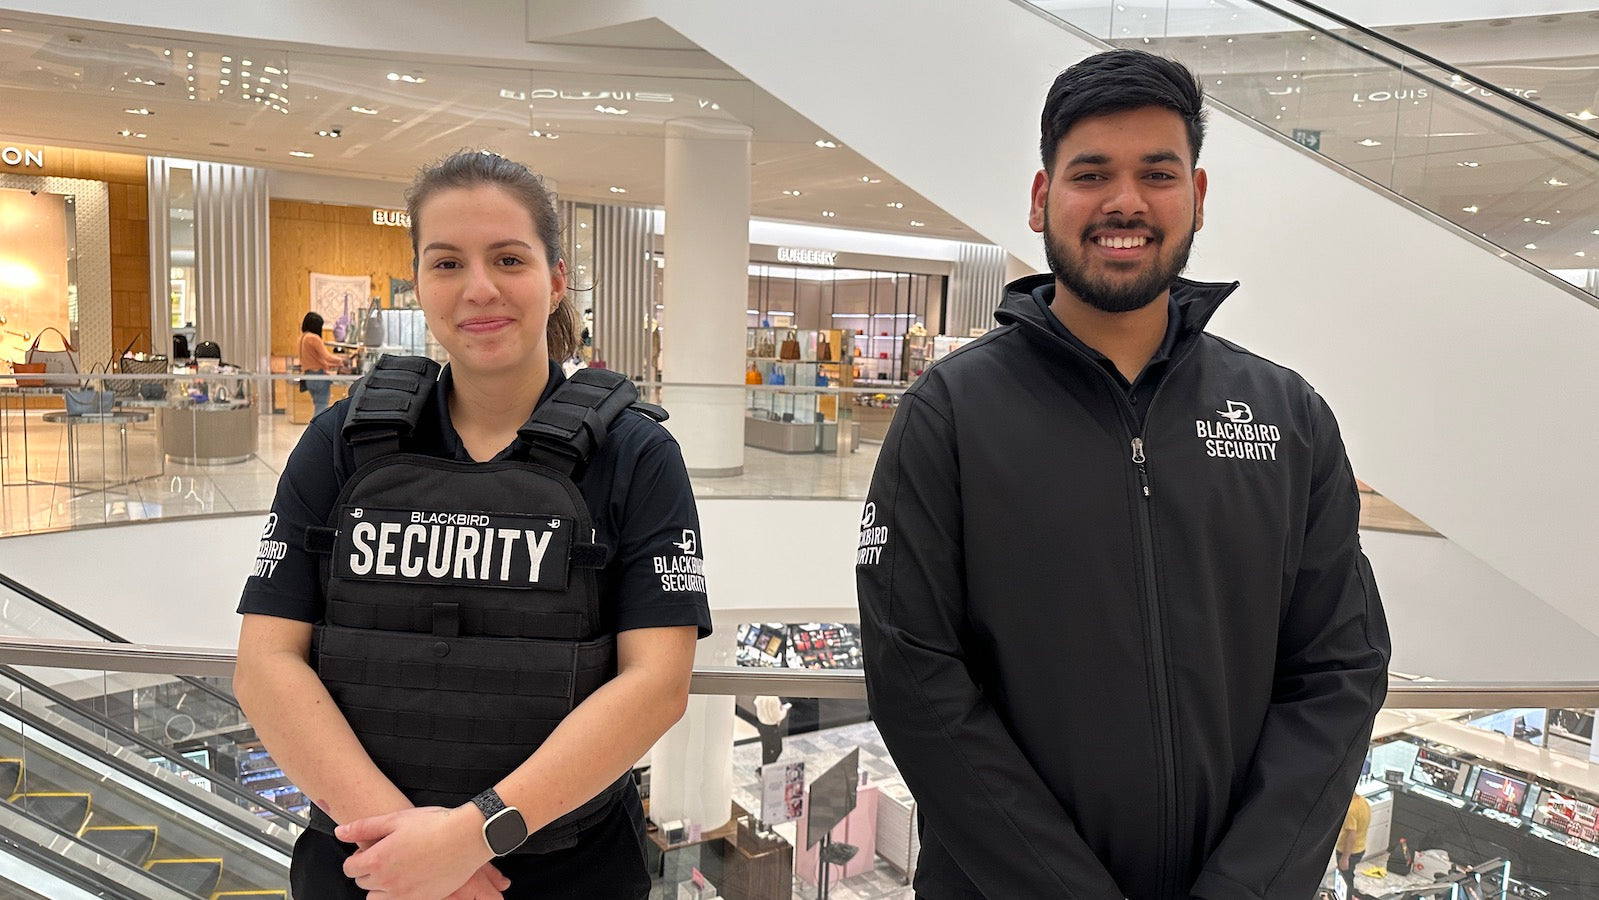 Two uniformed Blackbird Security guards standing in a shopping mall.